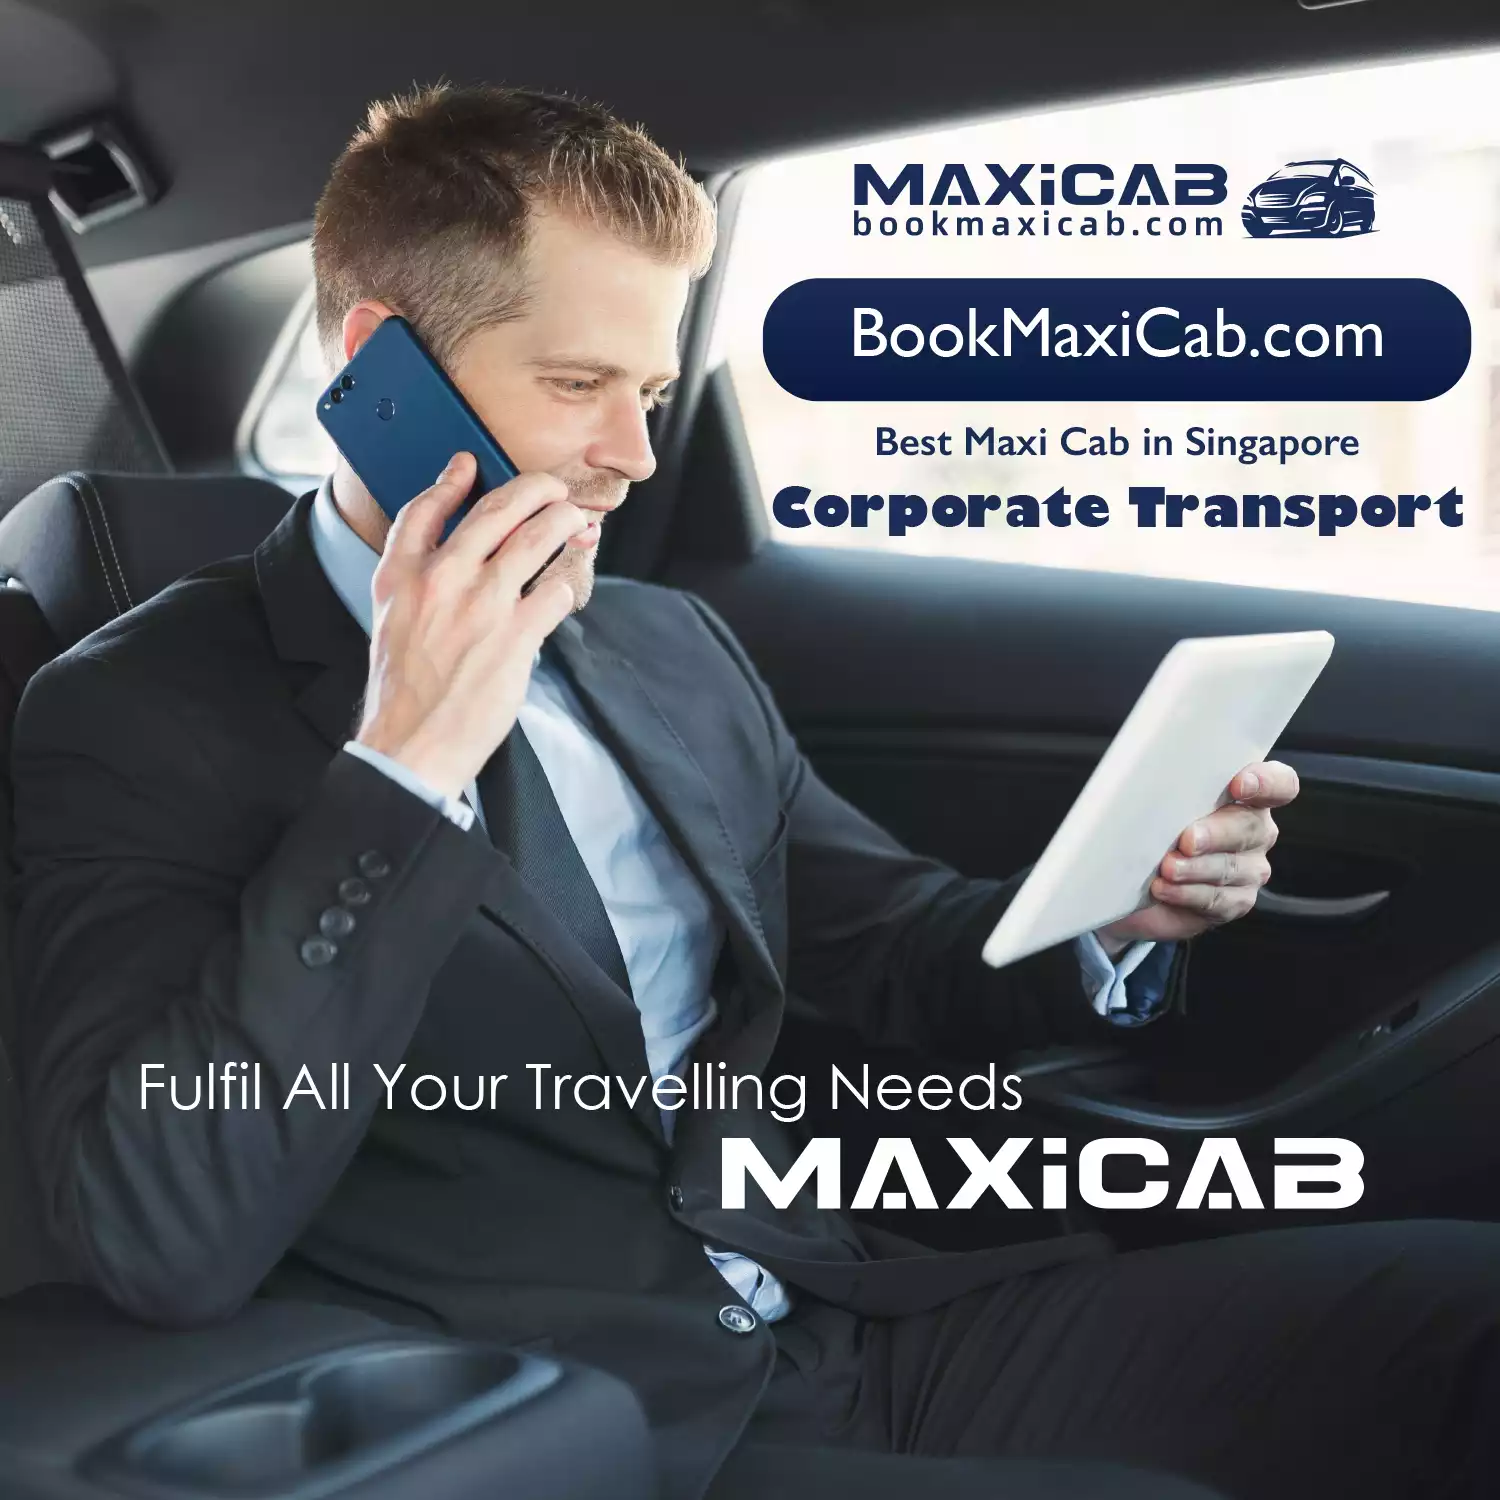 bookmaxicabdotcom website front picture showing an executive looking at this electronic tablet while travelling in a maxicab